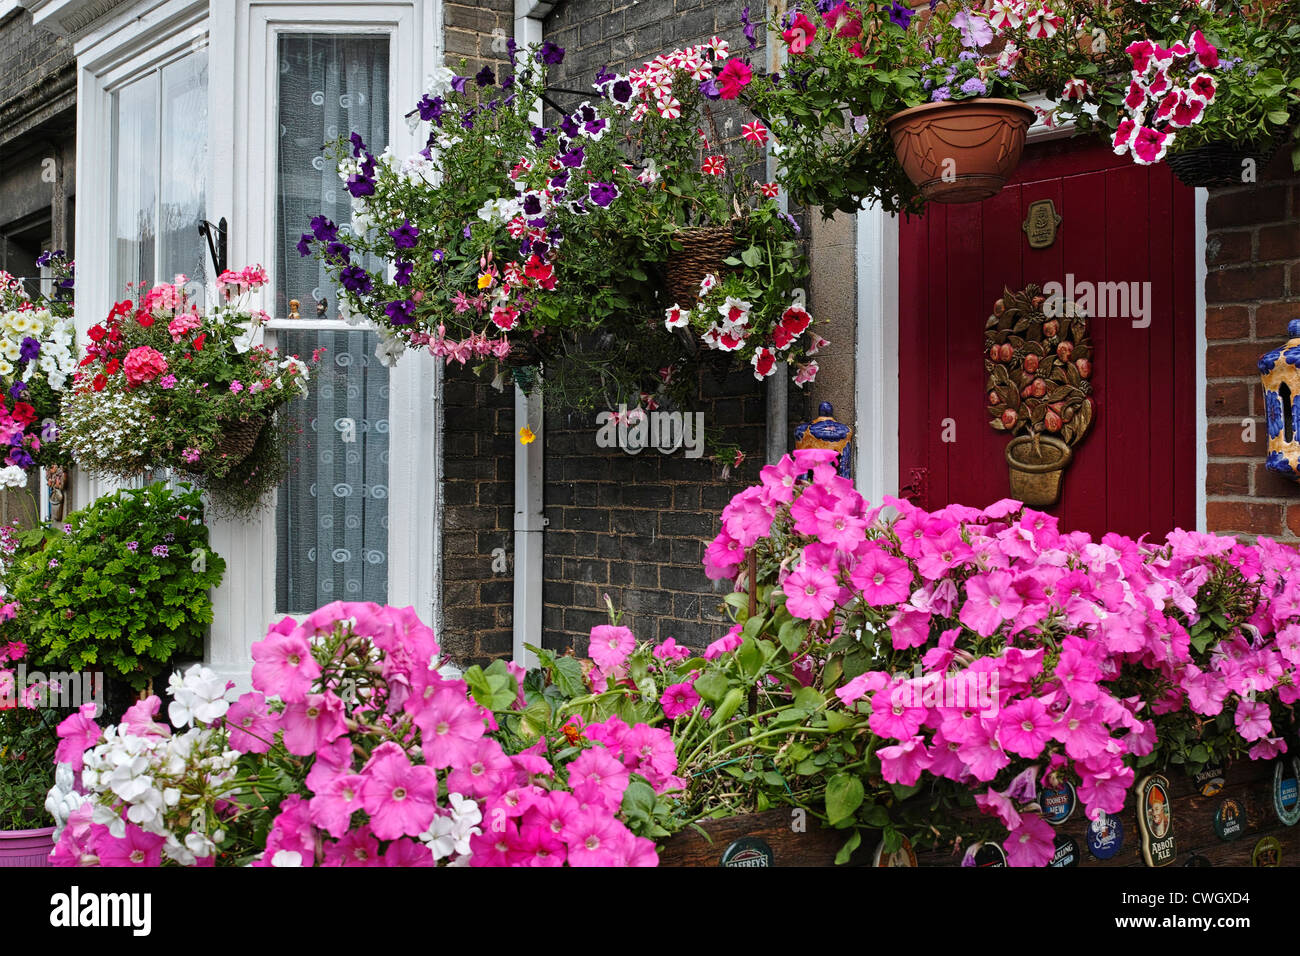 Floral display in front of a house in Bury St Edmunds Stock Photo